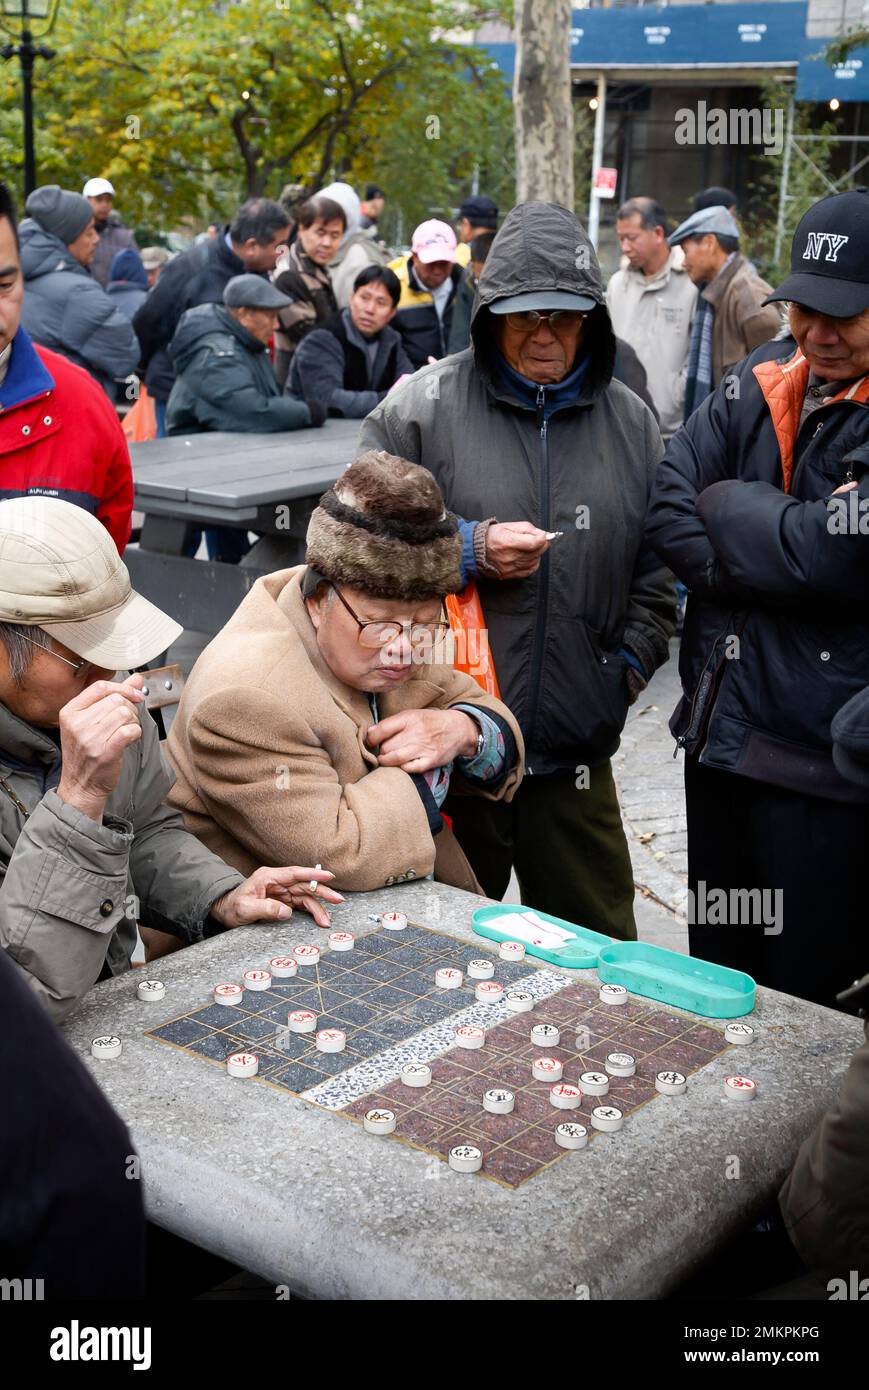 NEW YORK, USA - November 17, 2007. Men of Chinese ethnicity playing Xiangqi (Chinese chess) in a park in New York Stock Photo